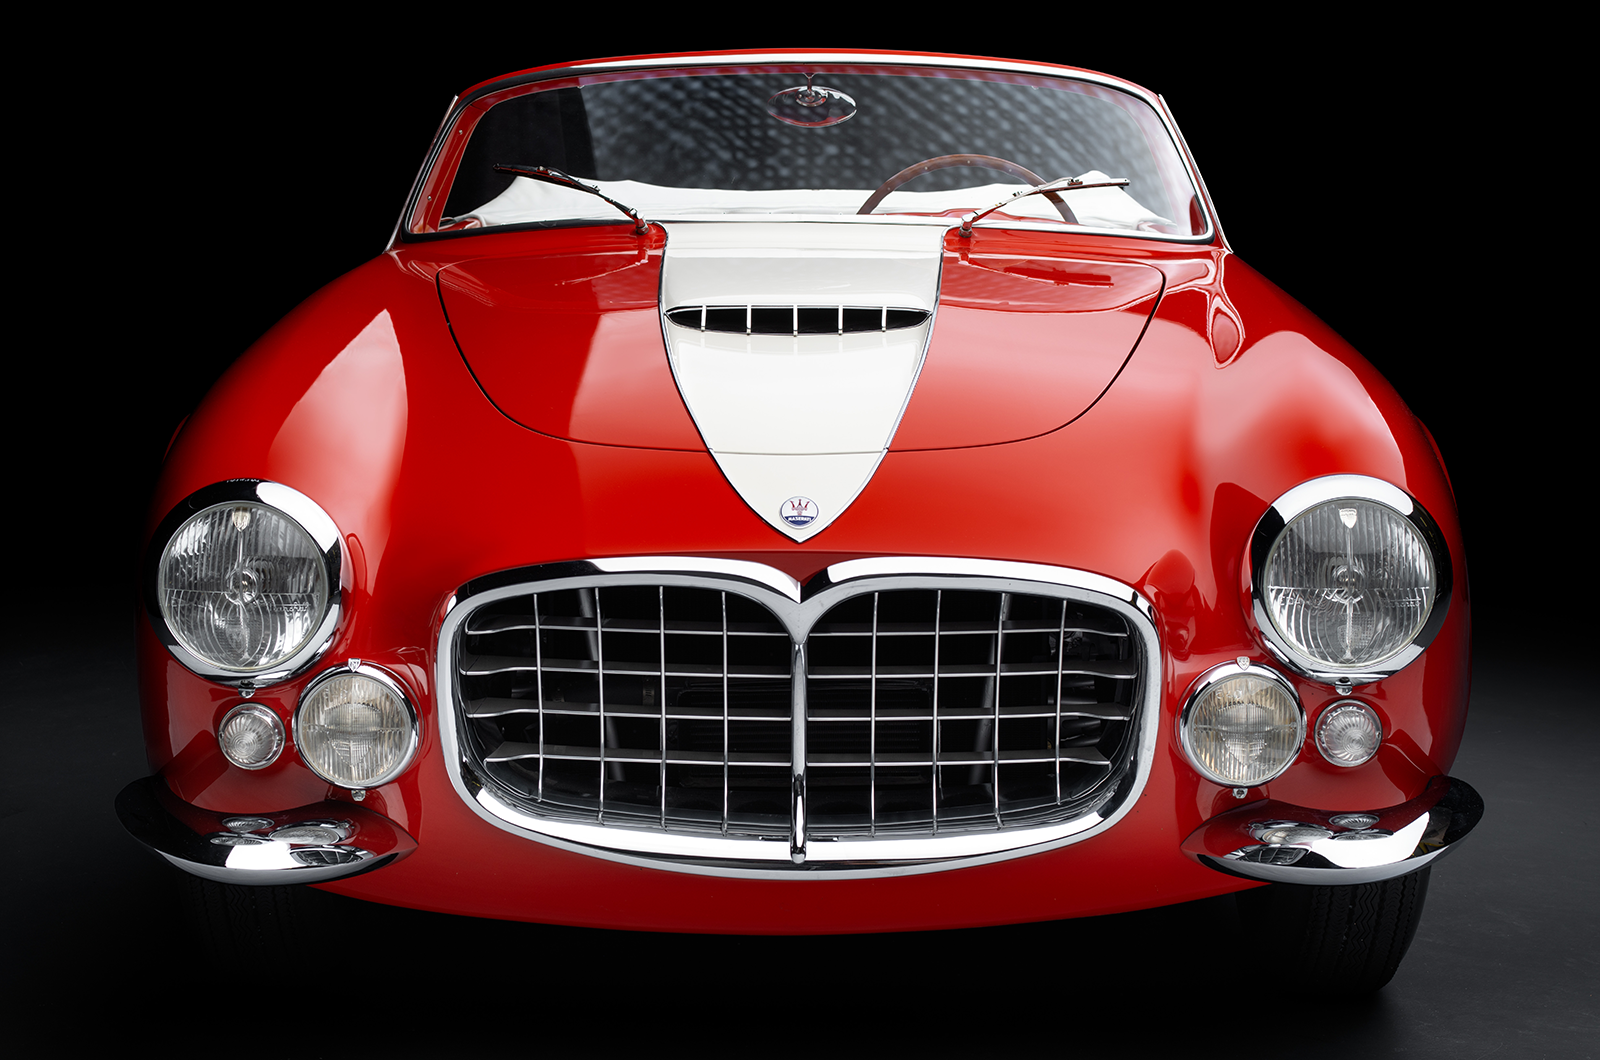 Classic & Sports Car – Open for business: Maserati A6GCS by Frua 